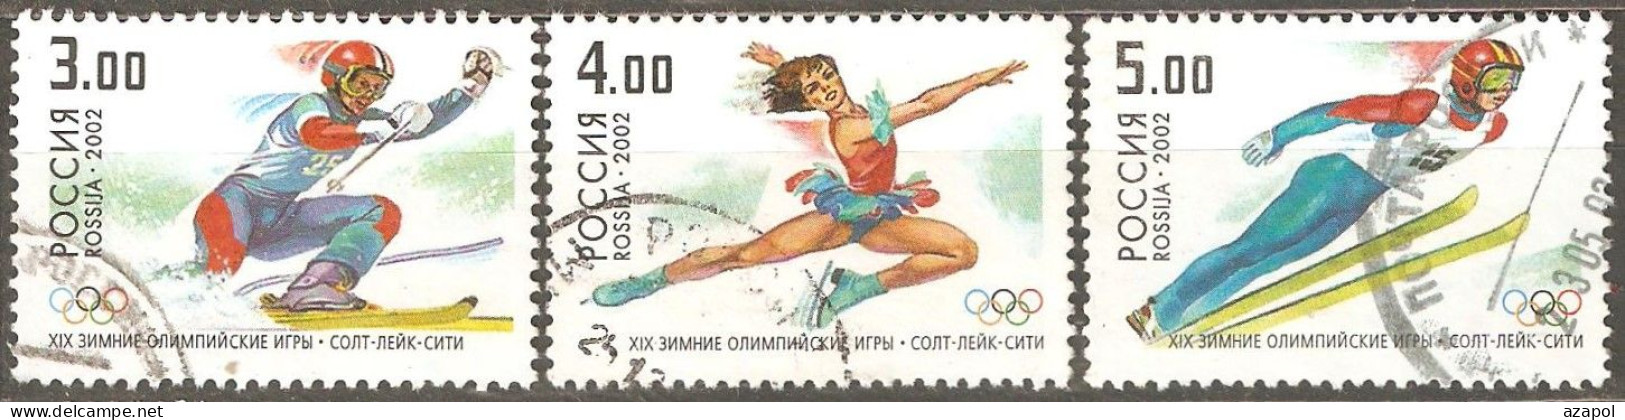 Russia: Full Set Of 3 Used Stamps, Winter Olympic Games - Salt Lake City, USA, 2002, Mi#956-8 - Usati